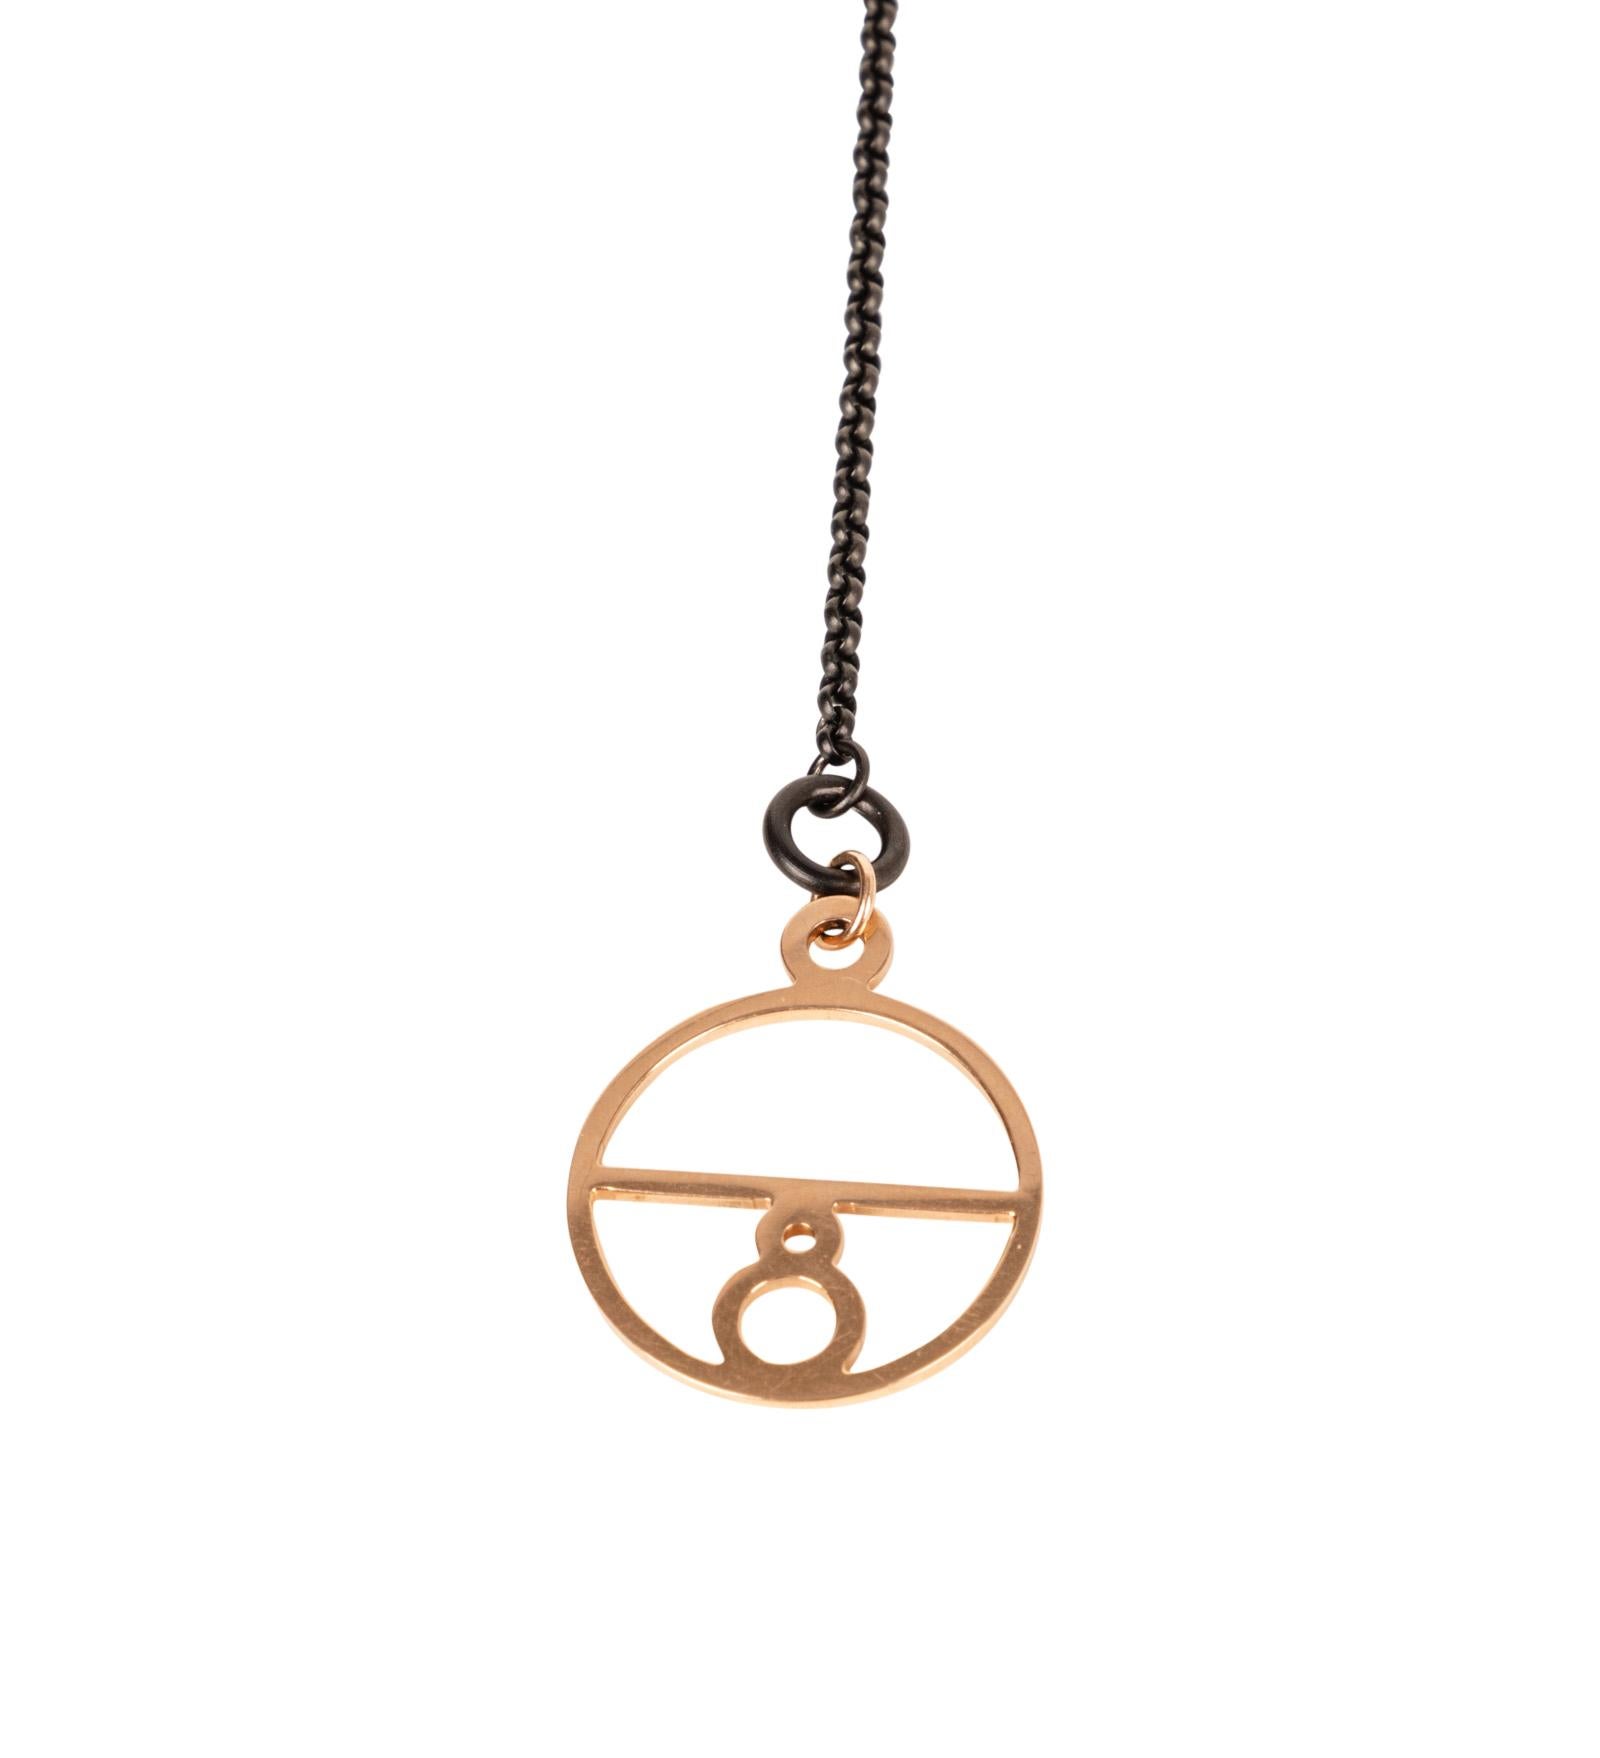 Hermes Crazy Caleche Necklace Blackened Silver 18K Rose Gold Limited Edition For Sale 1